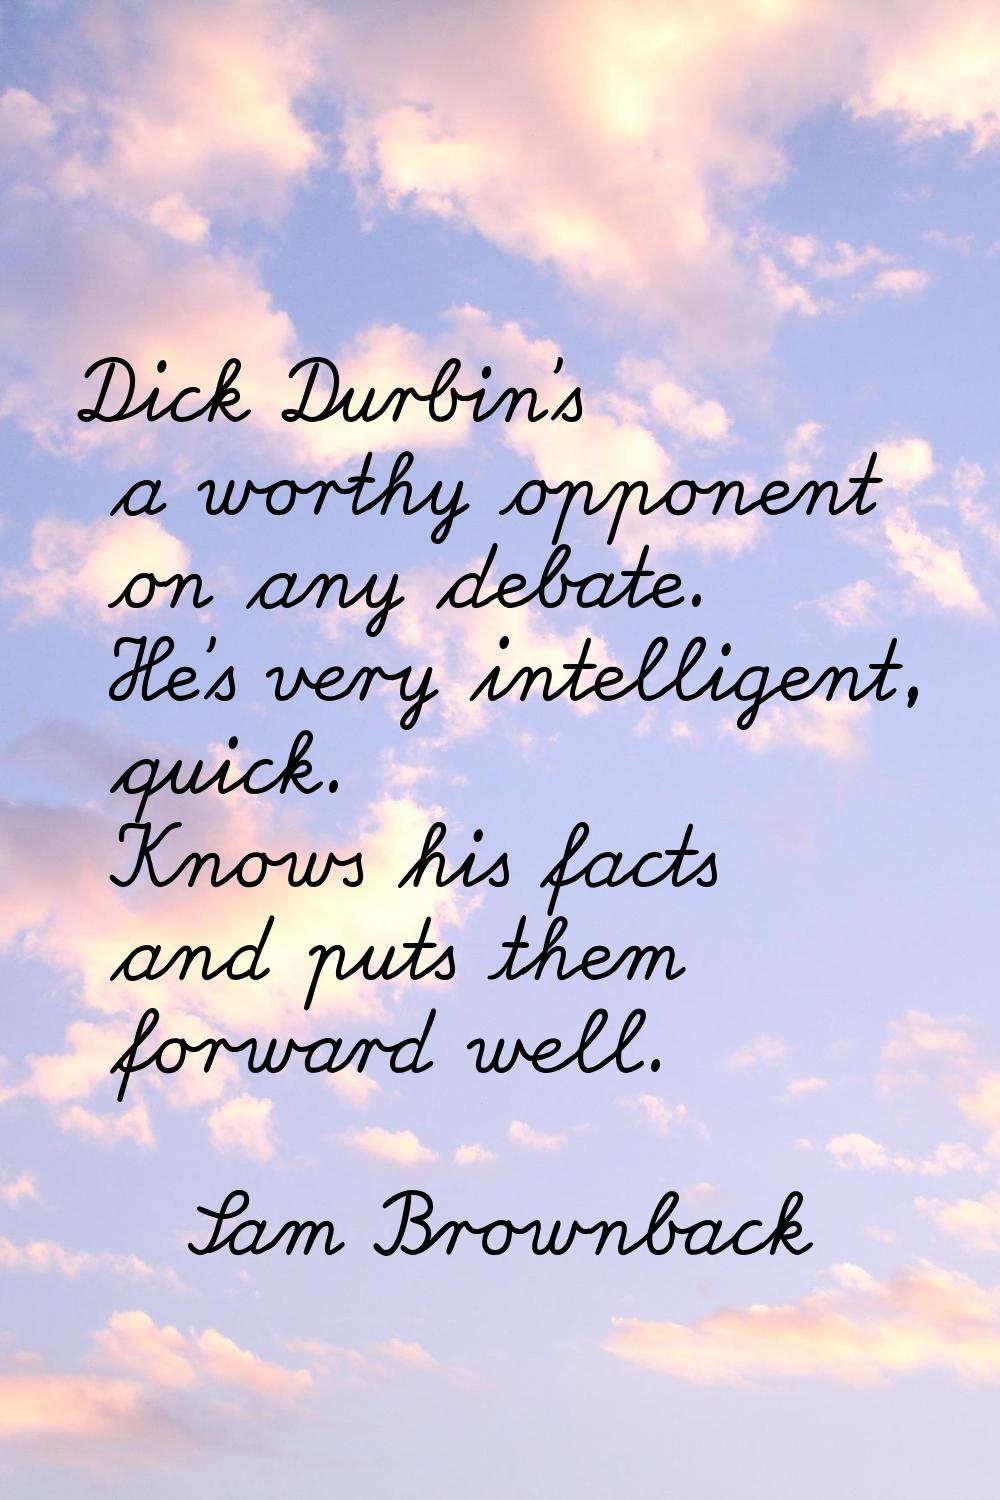 Dick Durbin's a worthy opponent on any debate. He's very intelligent, quick. Knows his facts and pu